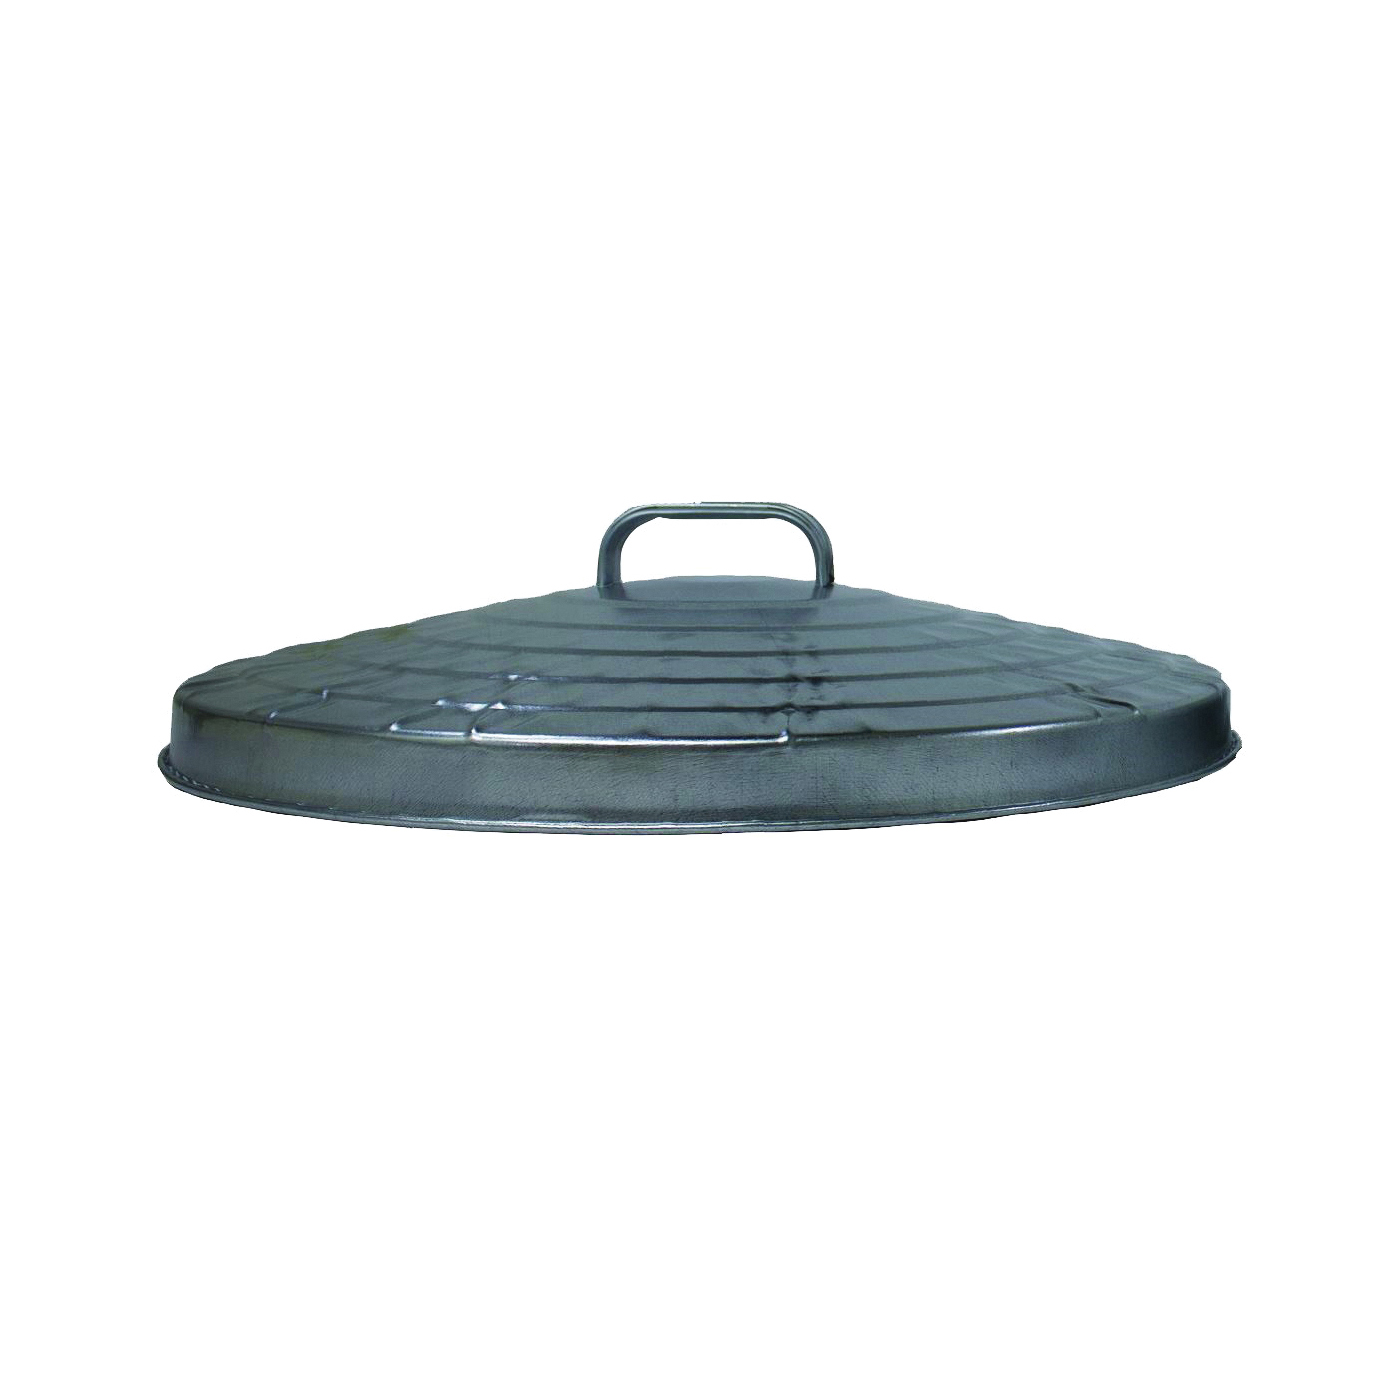 38113 Trash Can Lid, Galvanized Steel, Silver, For: 31 gal Cans